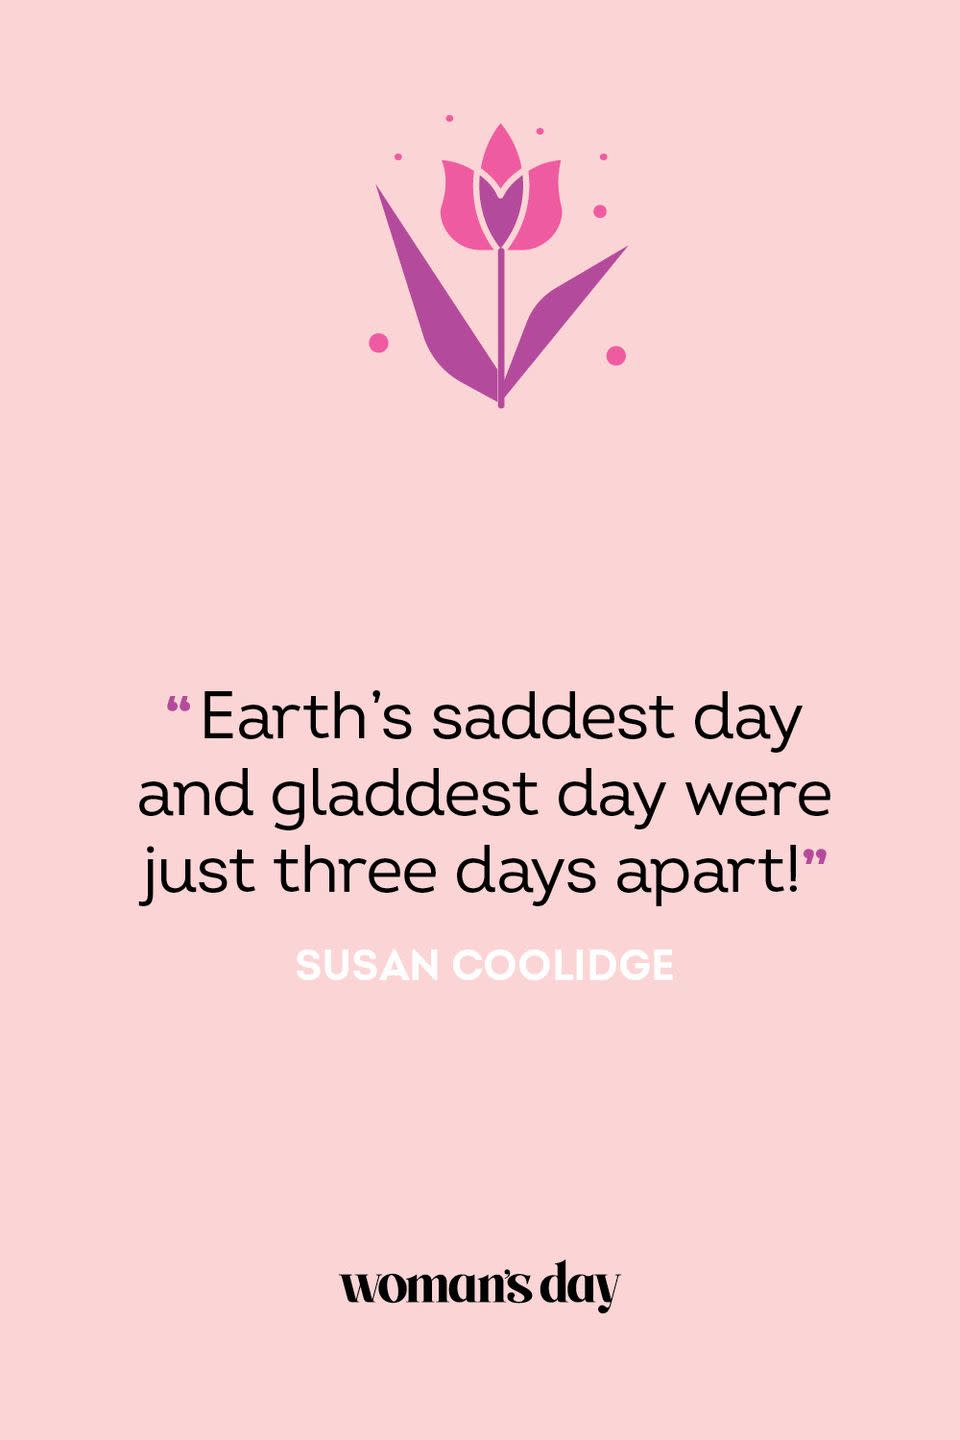 <p>“Earth’s saddest day and gladdest day were just three days apart!” — Susan Coolidge</p>